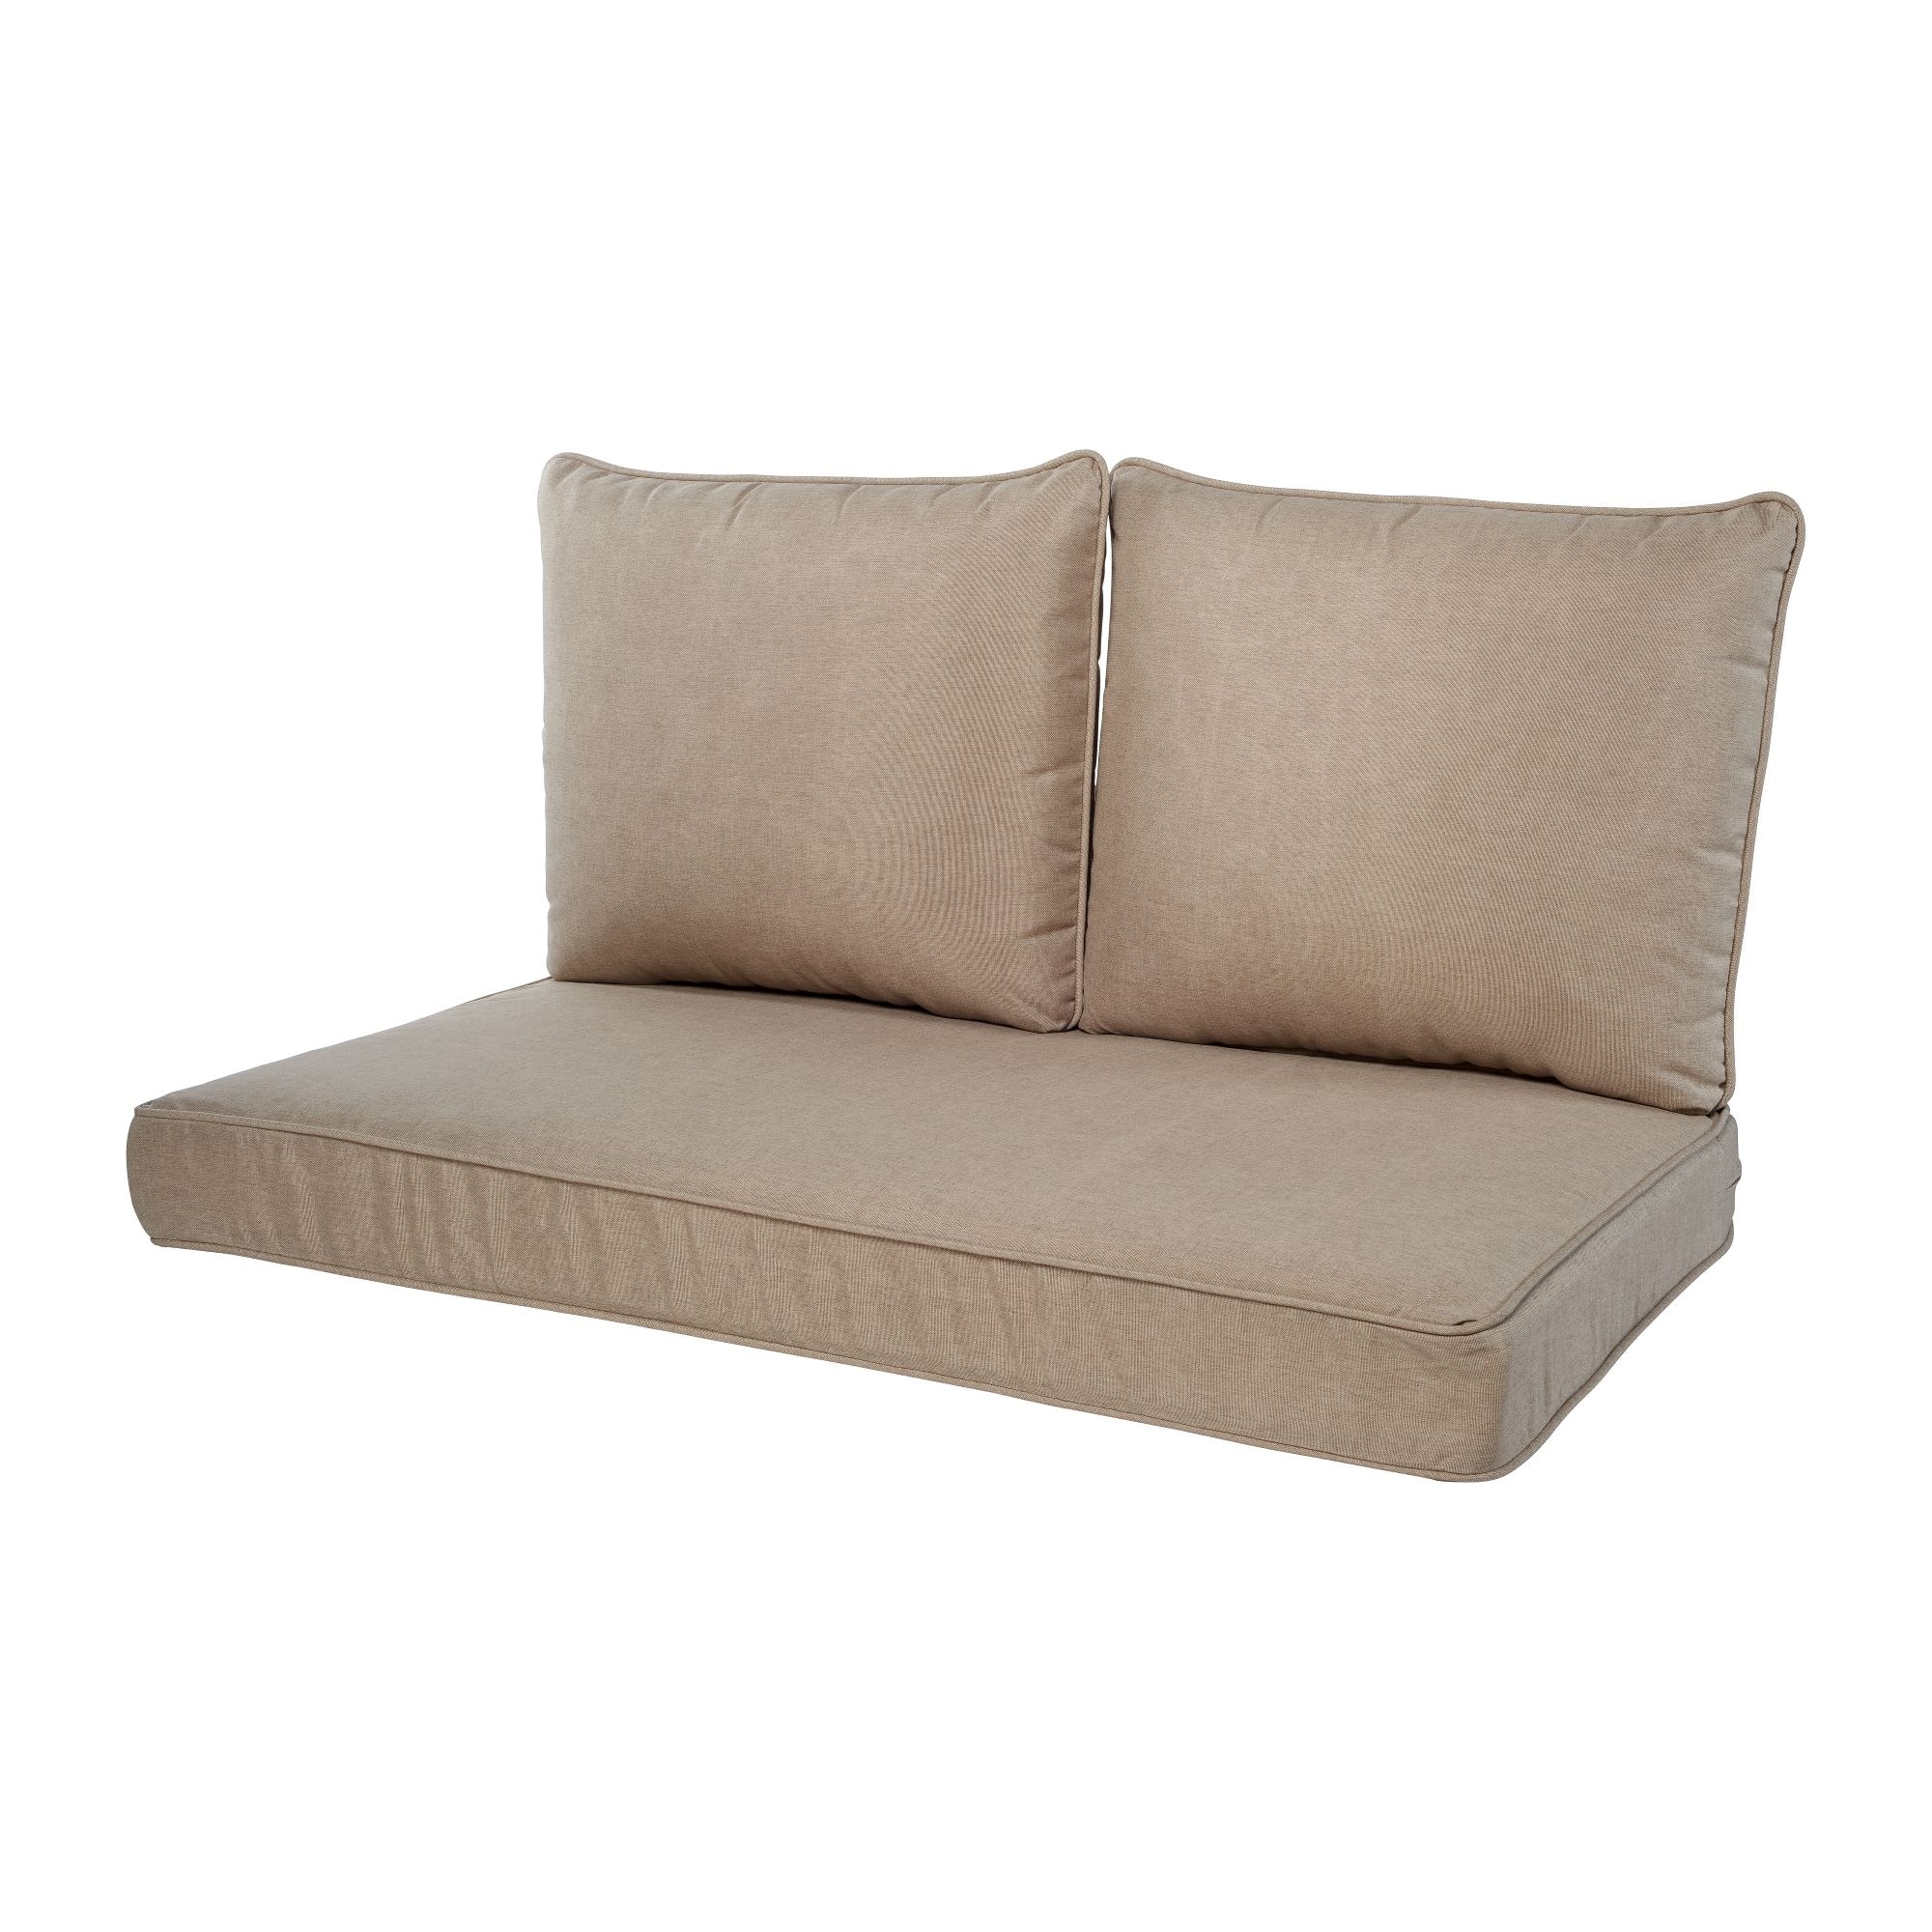 https://ak1.ostkcdn.com/images/products/is/images/direct/5a501c869c62d8746b9d851f834fff8578ee1767/Haven-Way-Loveseat-Cushion-Set.jpg